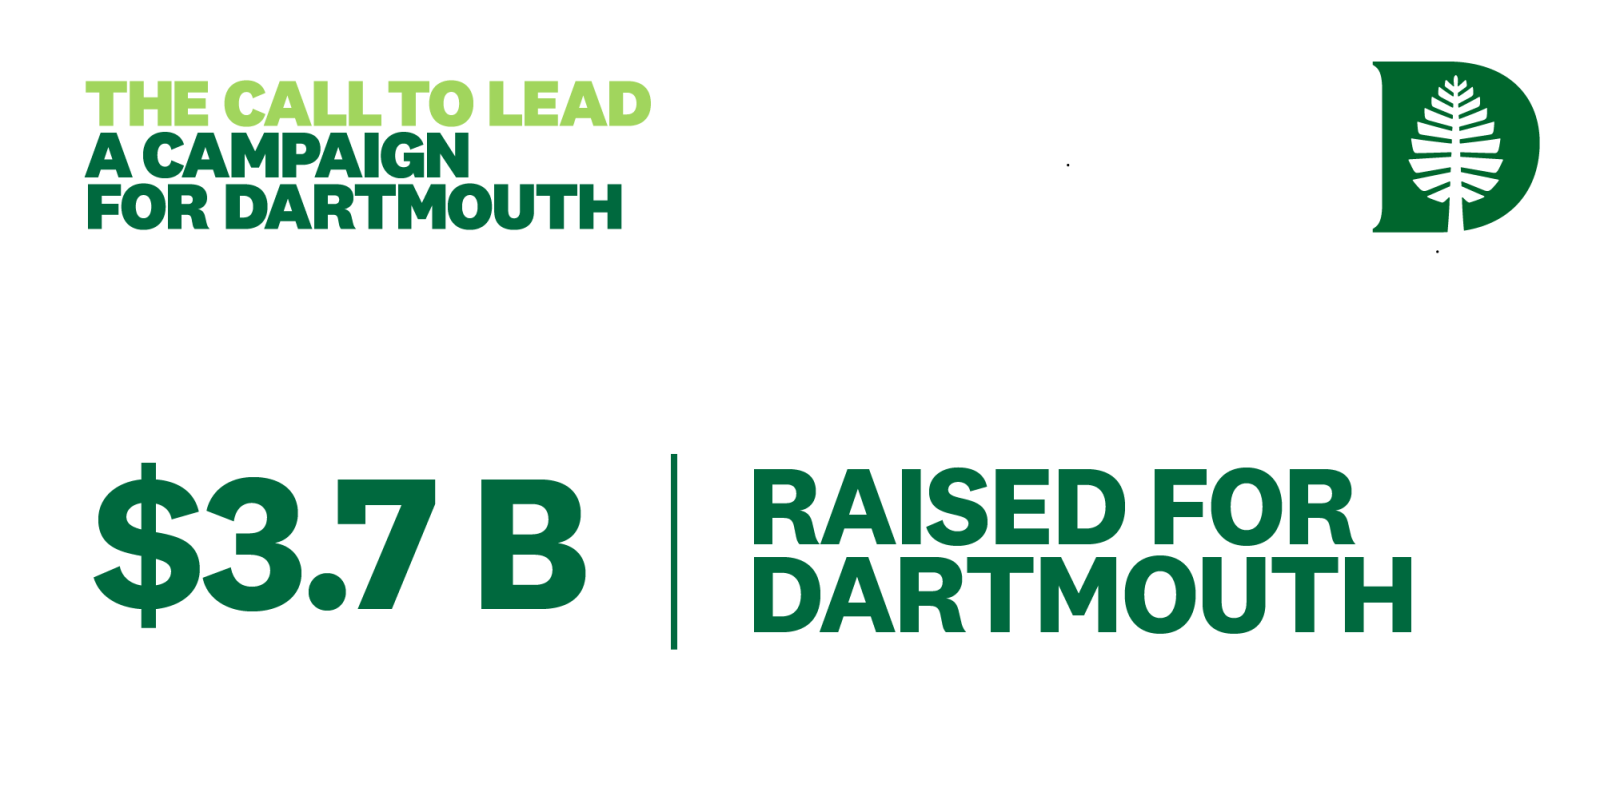 The Call to Lead; $3.7 billion raised for Dartmouth